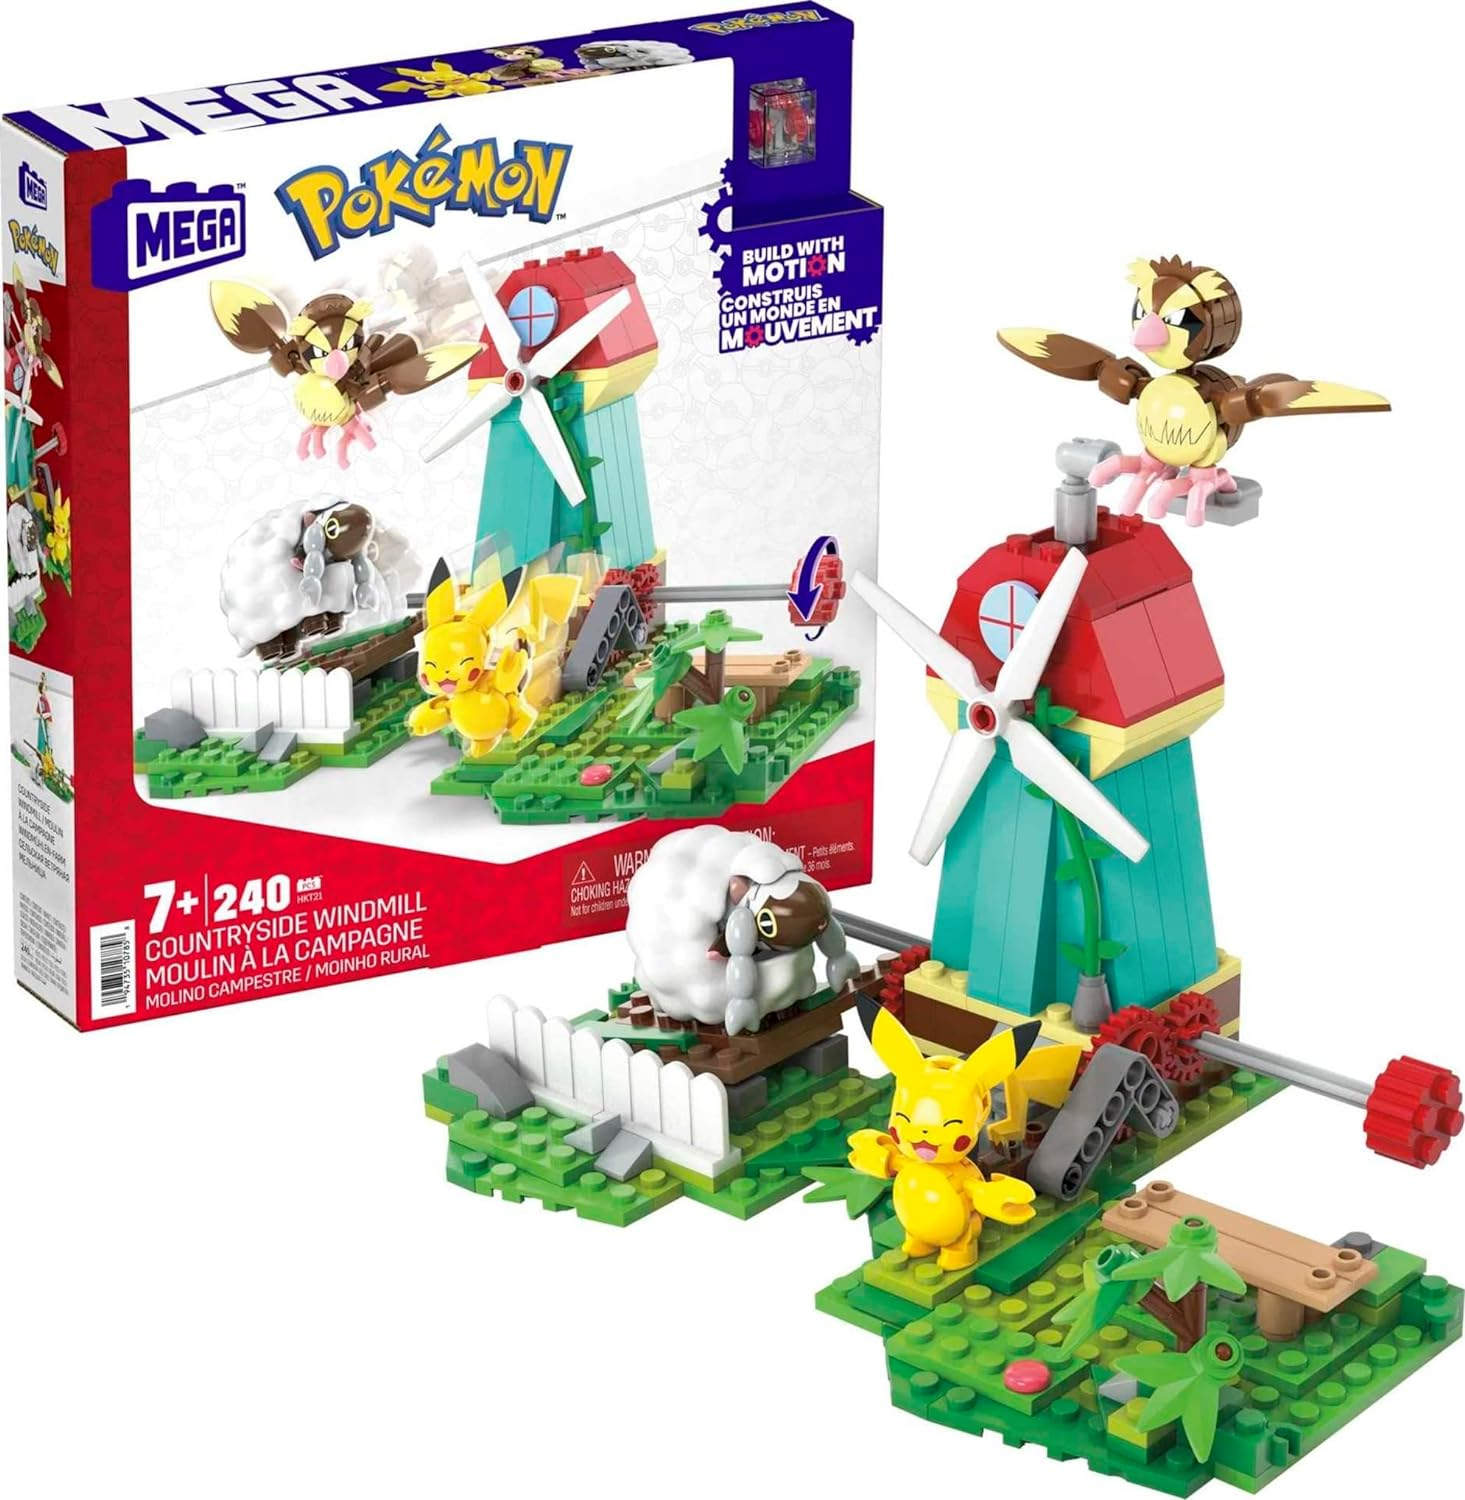 Amazon.com: MEGA Pokémon Action Figure Building Toy Set, Countryside Windmill With 240 Pieces, Motion And 3 Poseable Characters, Gift Idea For Kids : Video Games $9.59